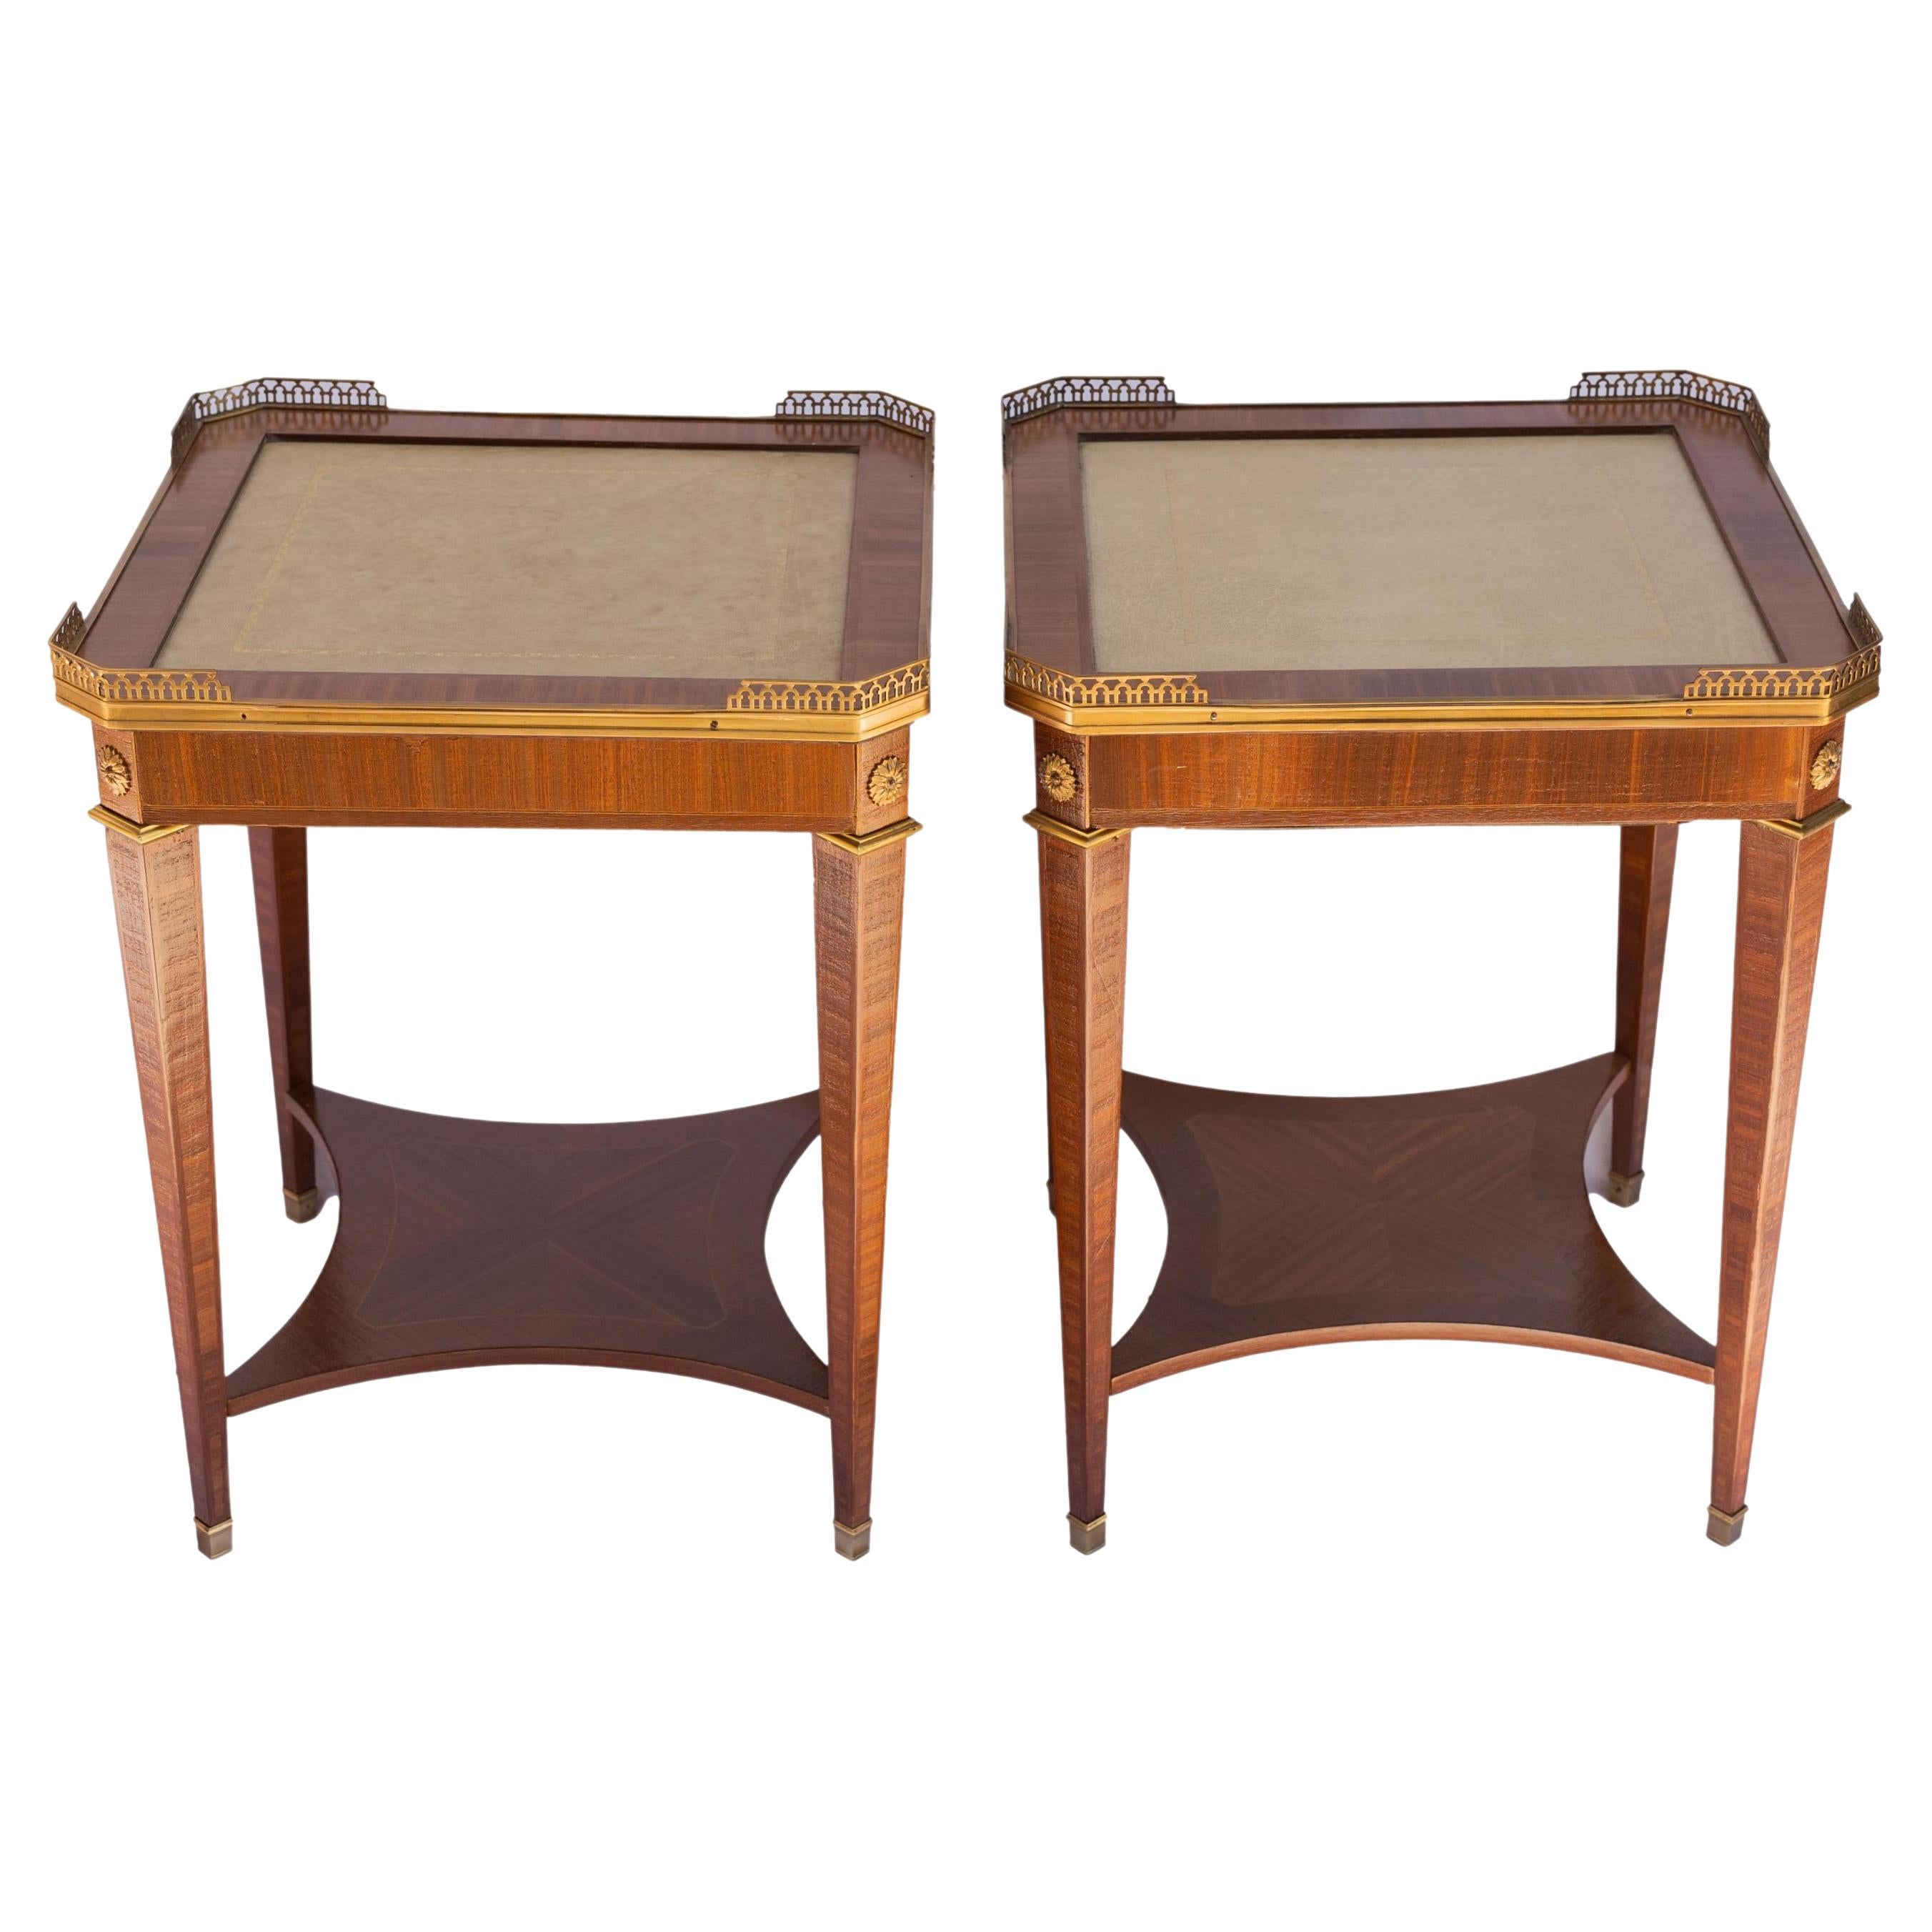 Pair of Directoire-Style Mahogany Side Tables, Leather Top, French, ca. 1920 